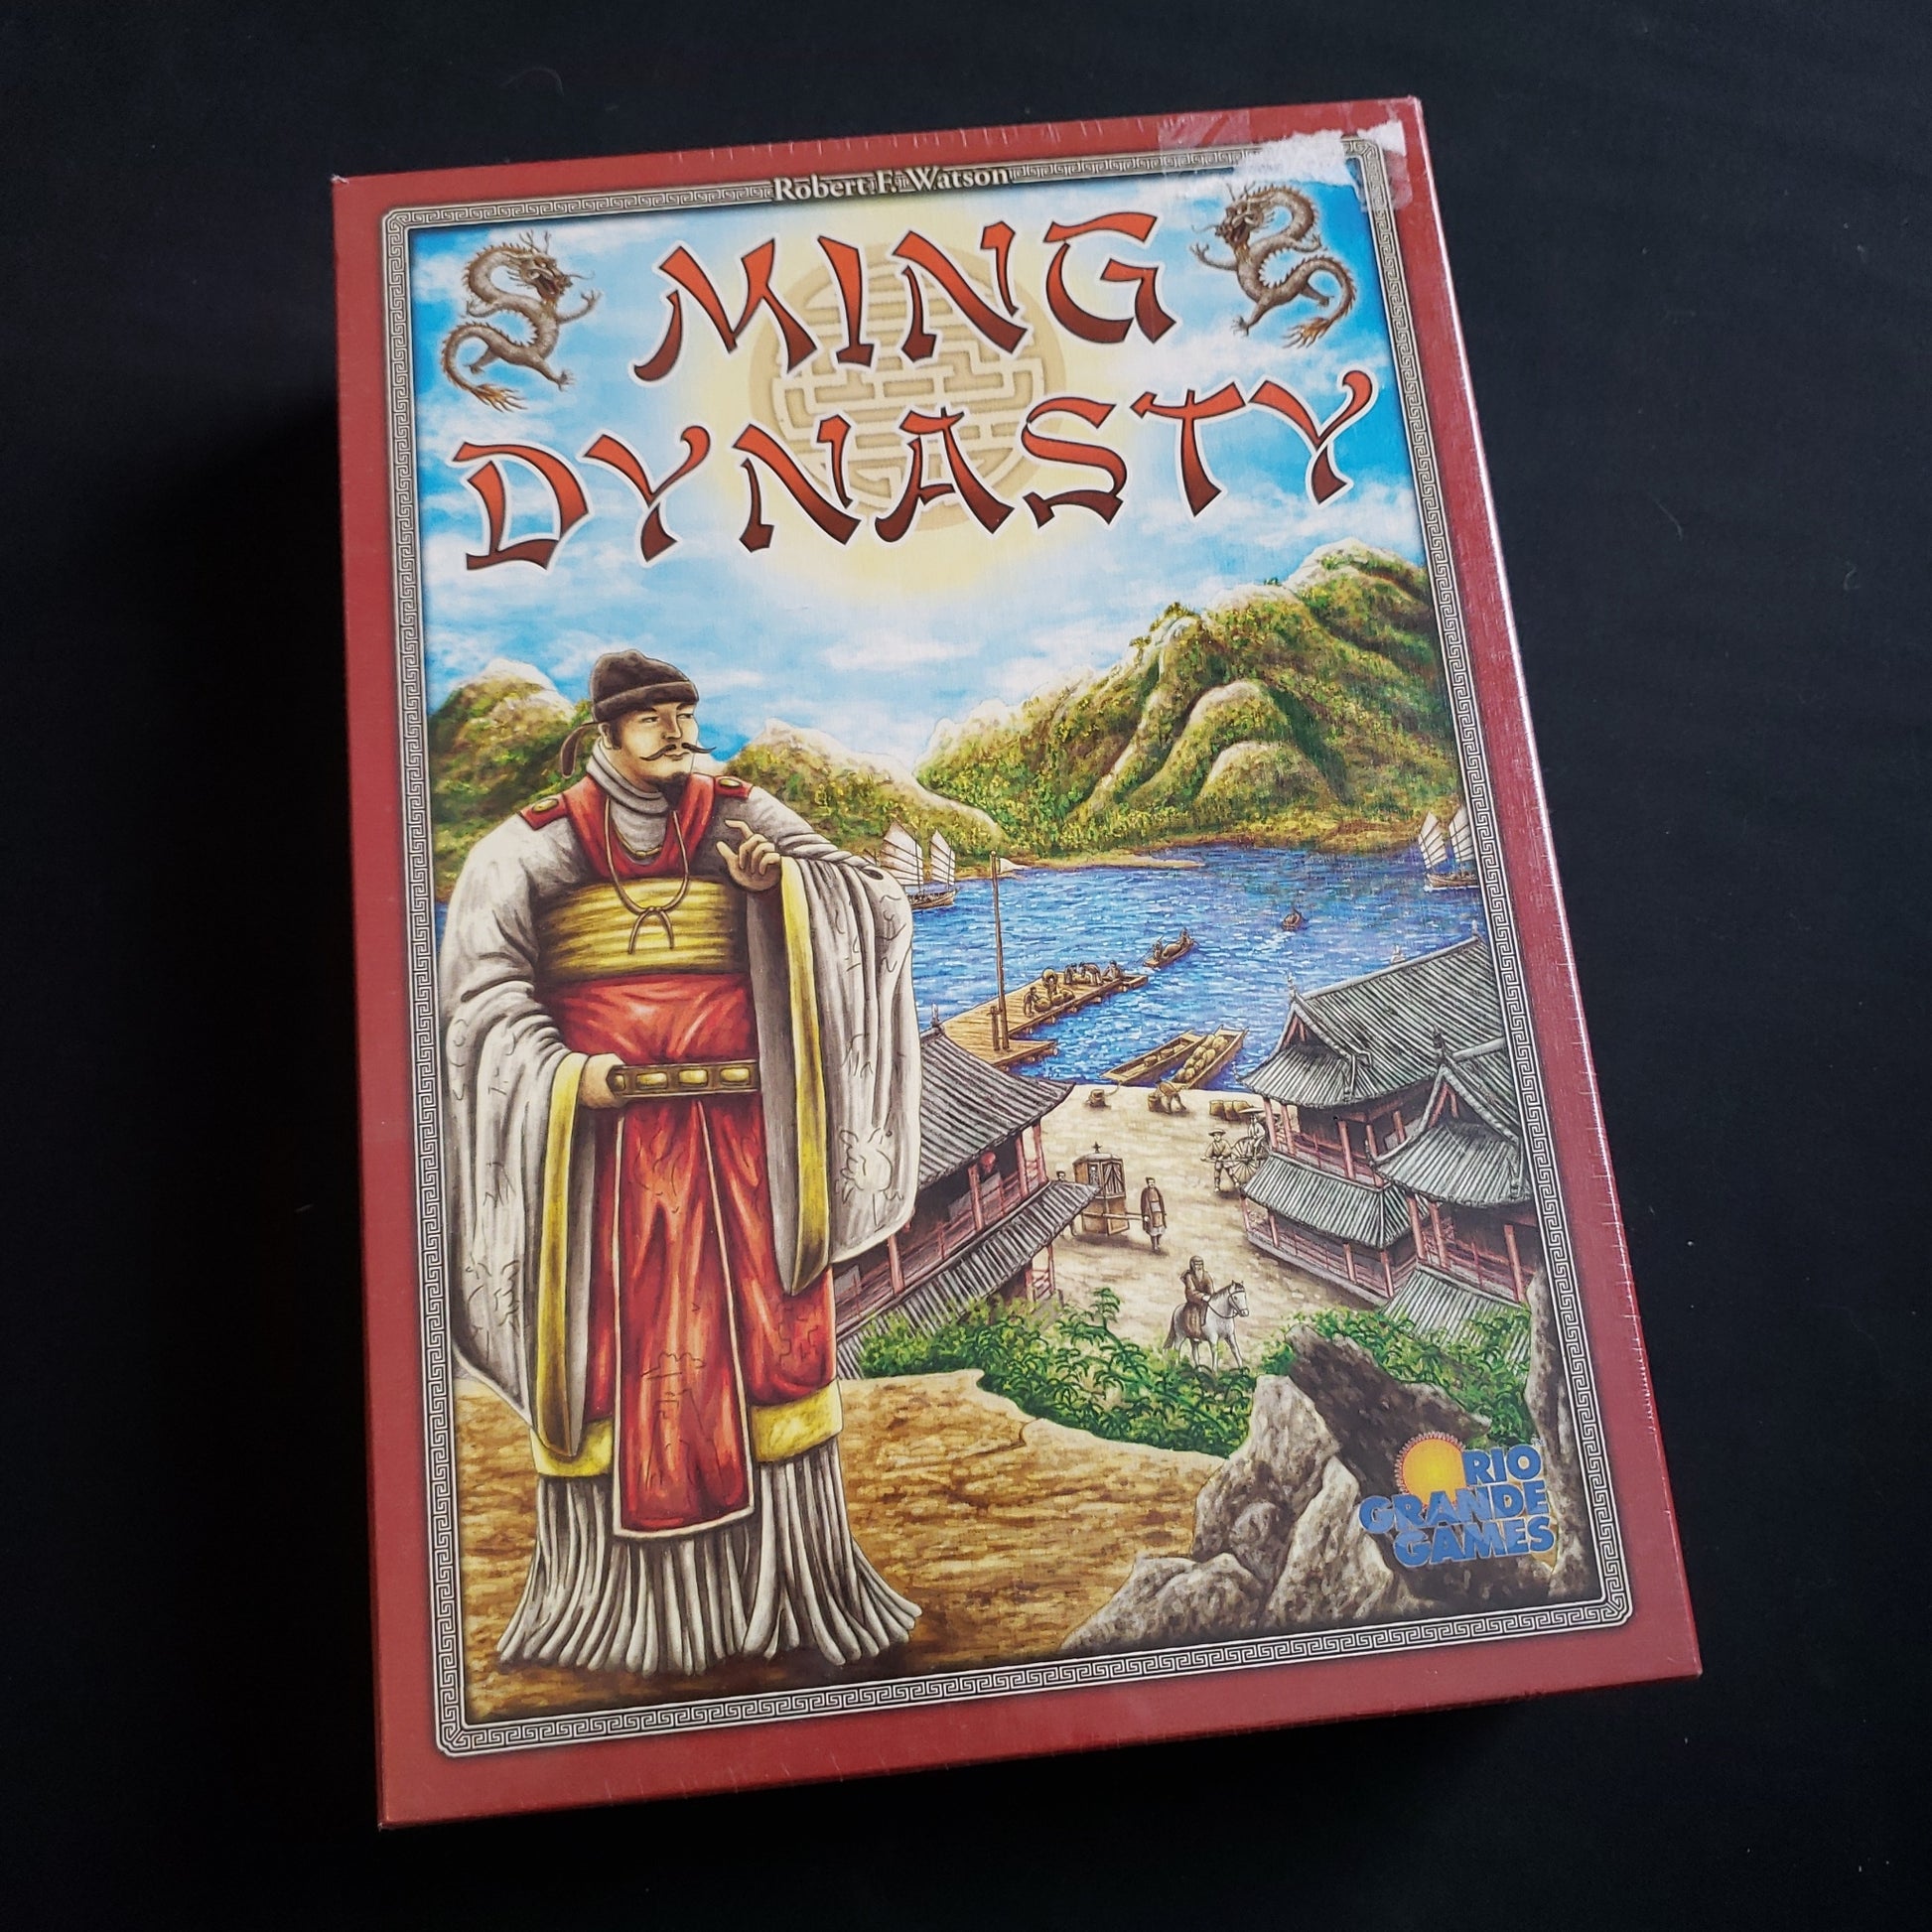 Image shows the front cover of the box of the Ming Dynasty board game